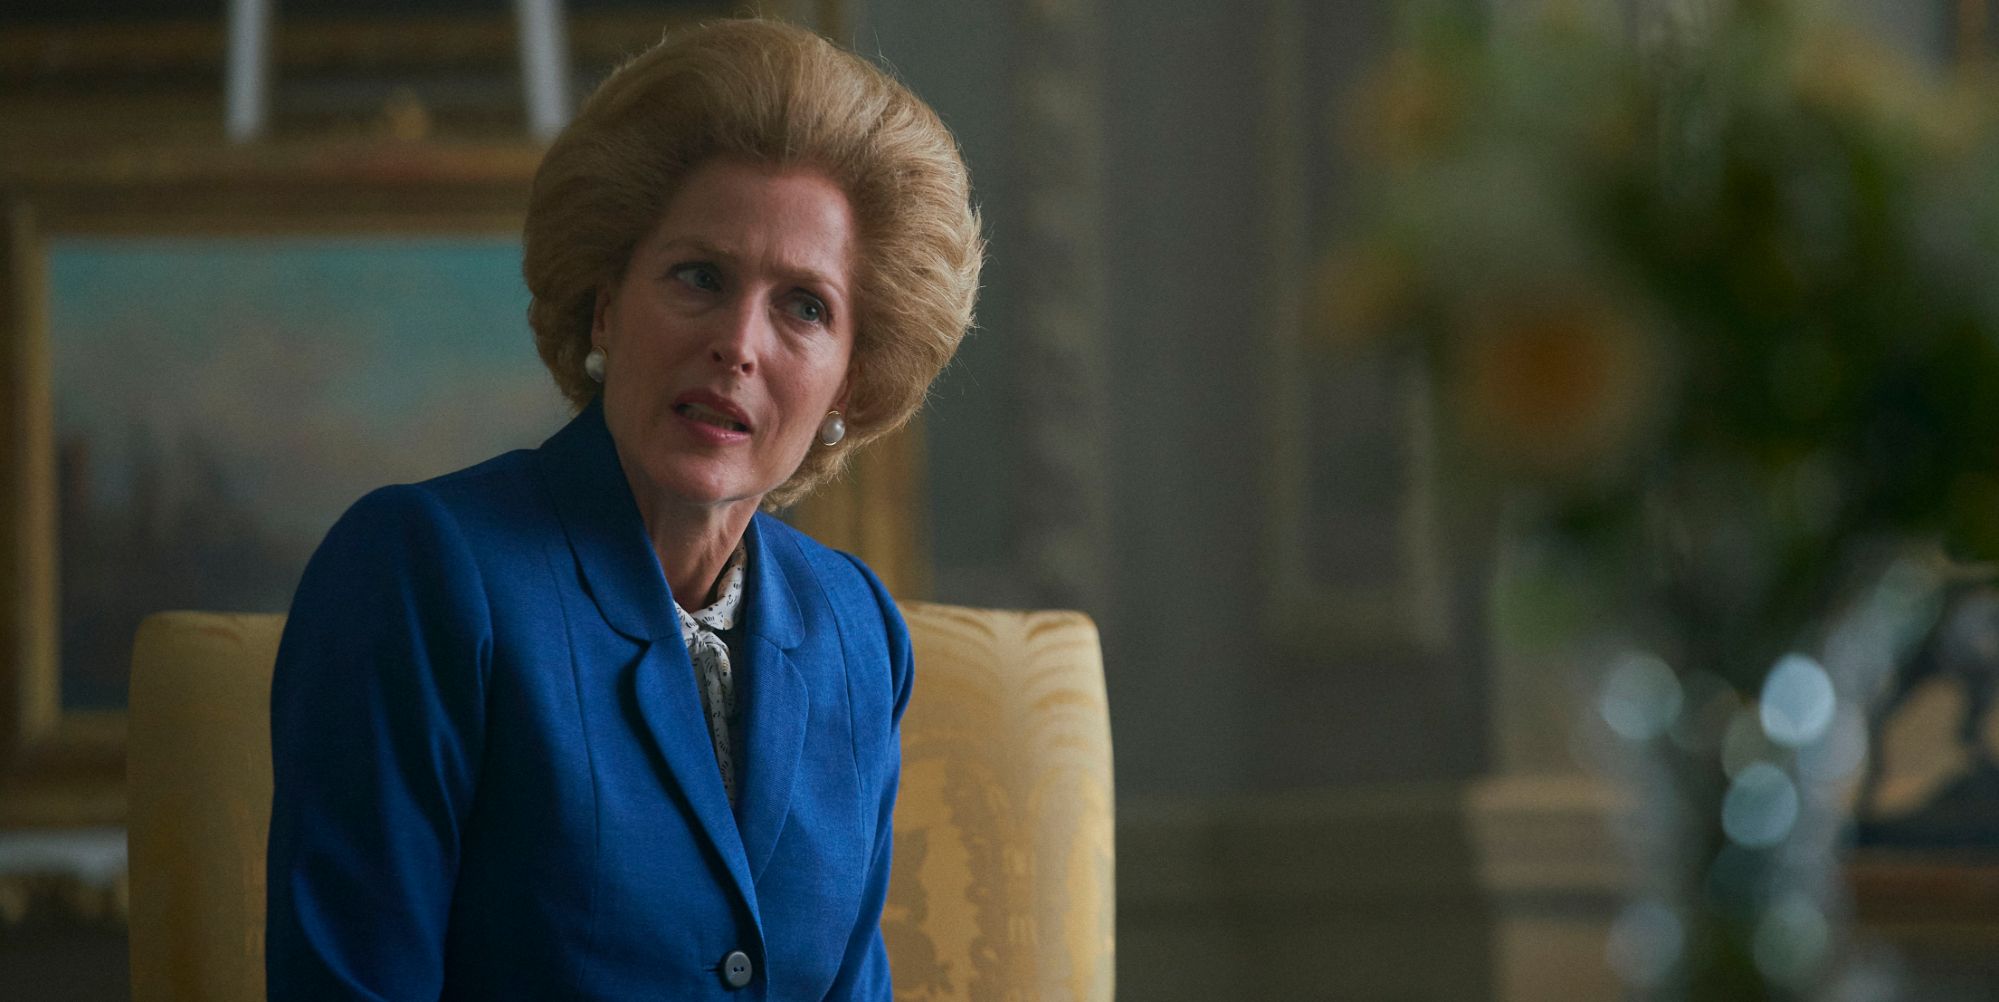 Margeret Thatcher as depicted on Netflix's The Crown.